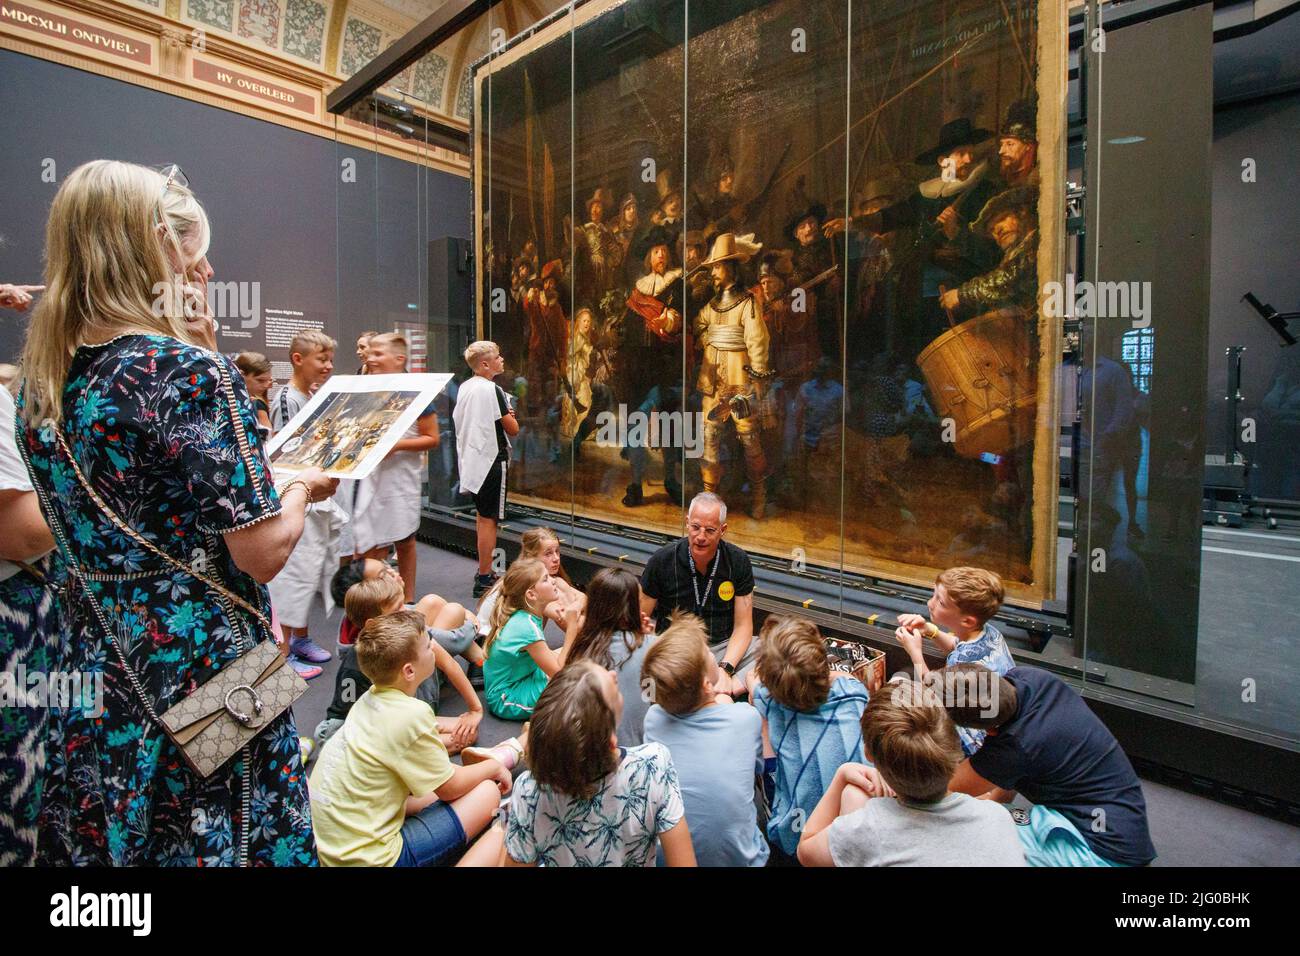 Visitors looking at the Rembrant The Rijksmuseum, Amsterdam. Stock Photo